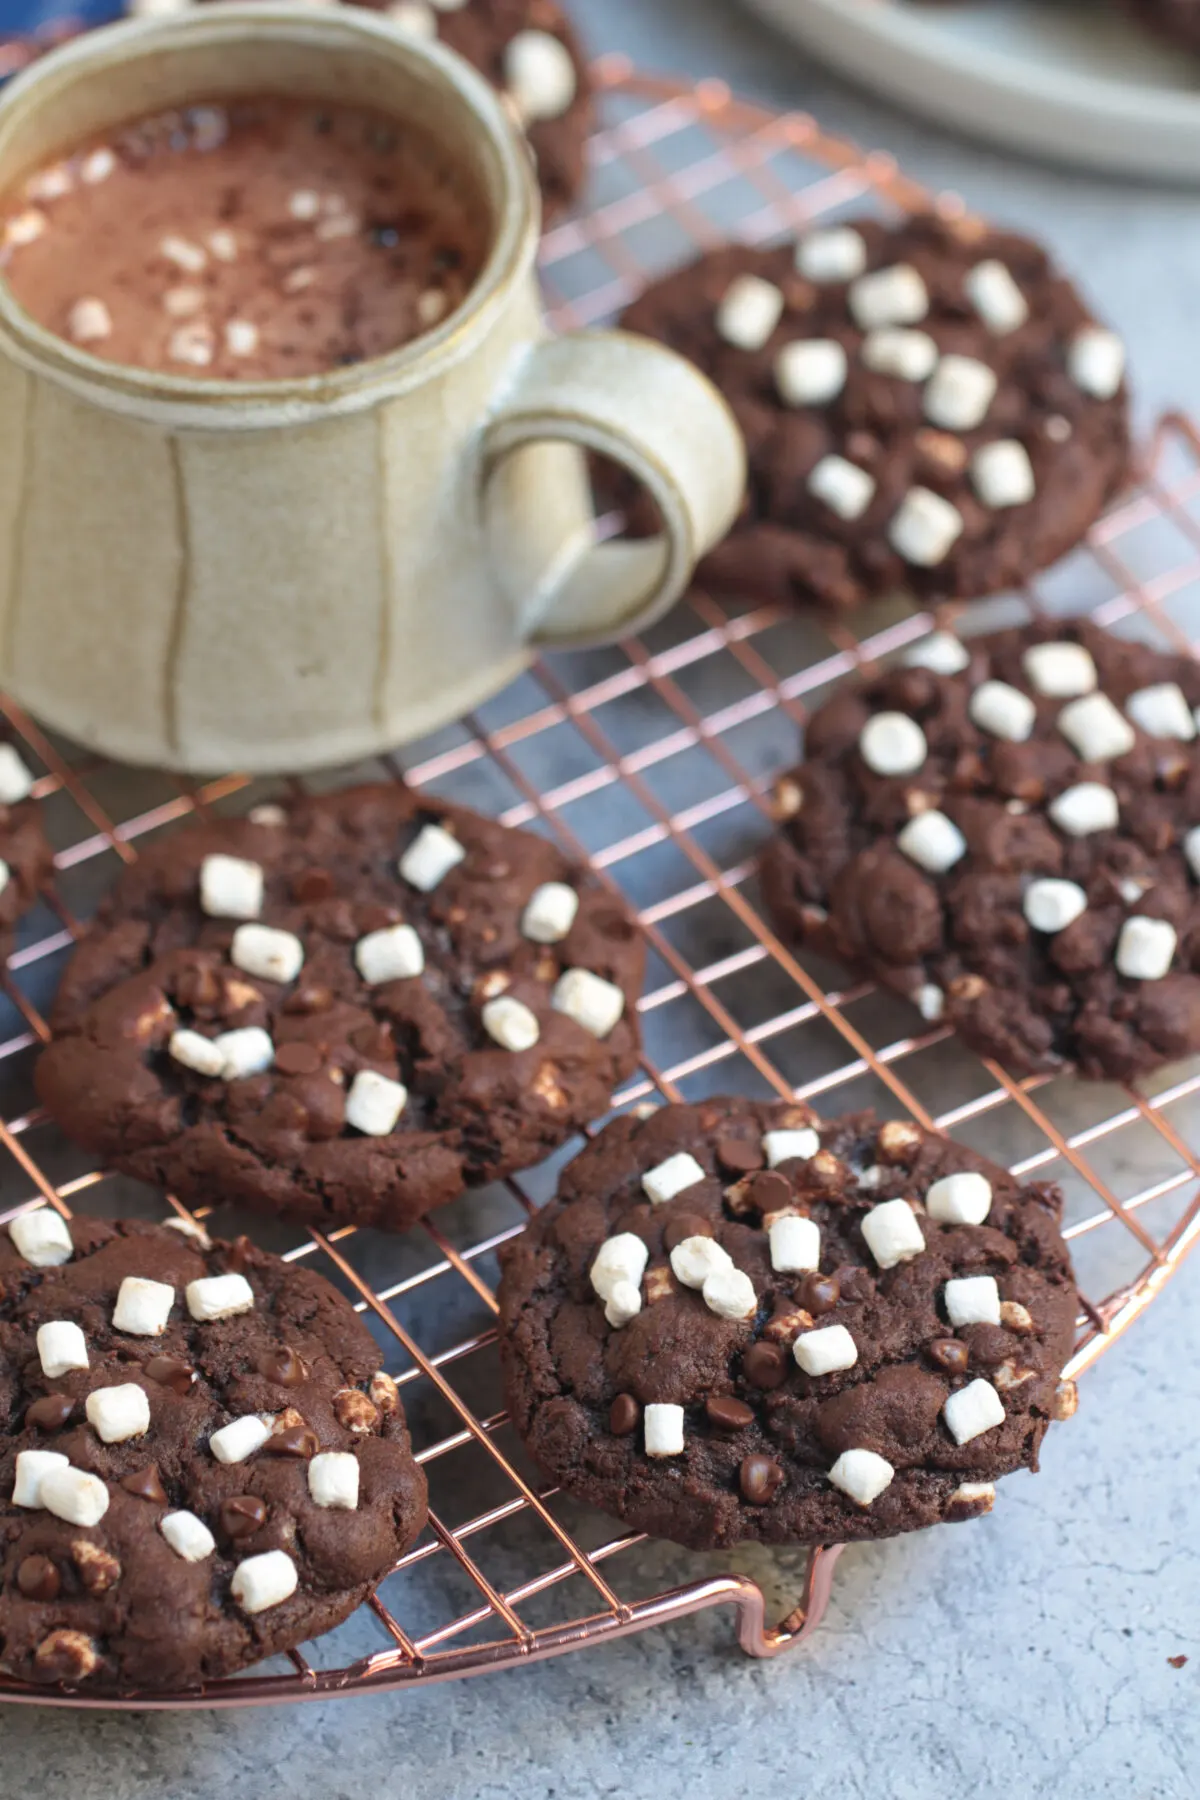 These hot chocolate cookies are the perfect winter treat! They're easy to make, soft and chewy, and they taste just like a rich hot cocoa.